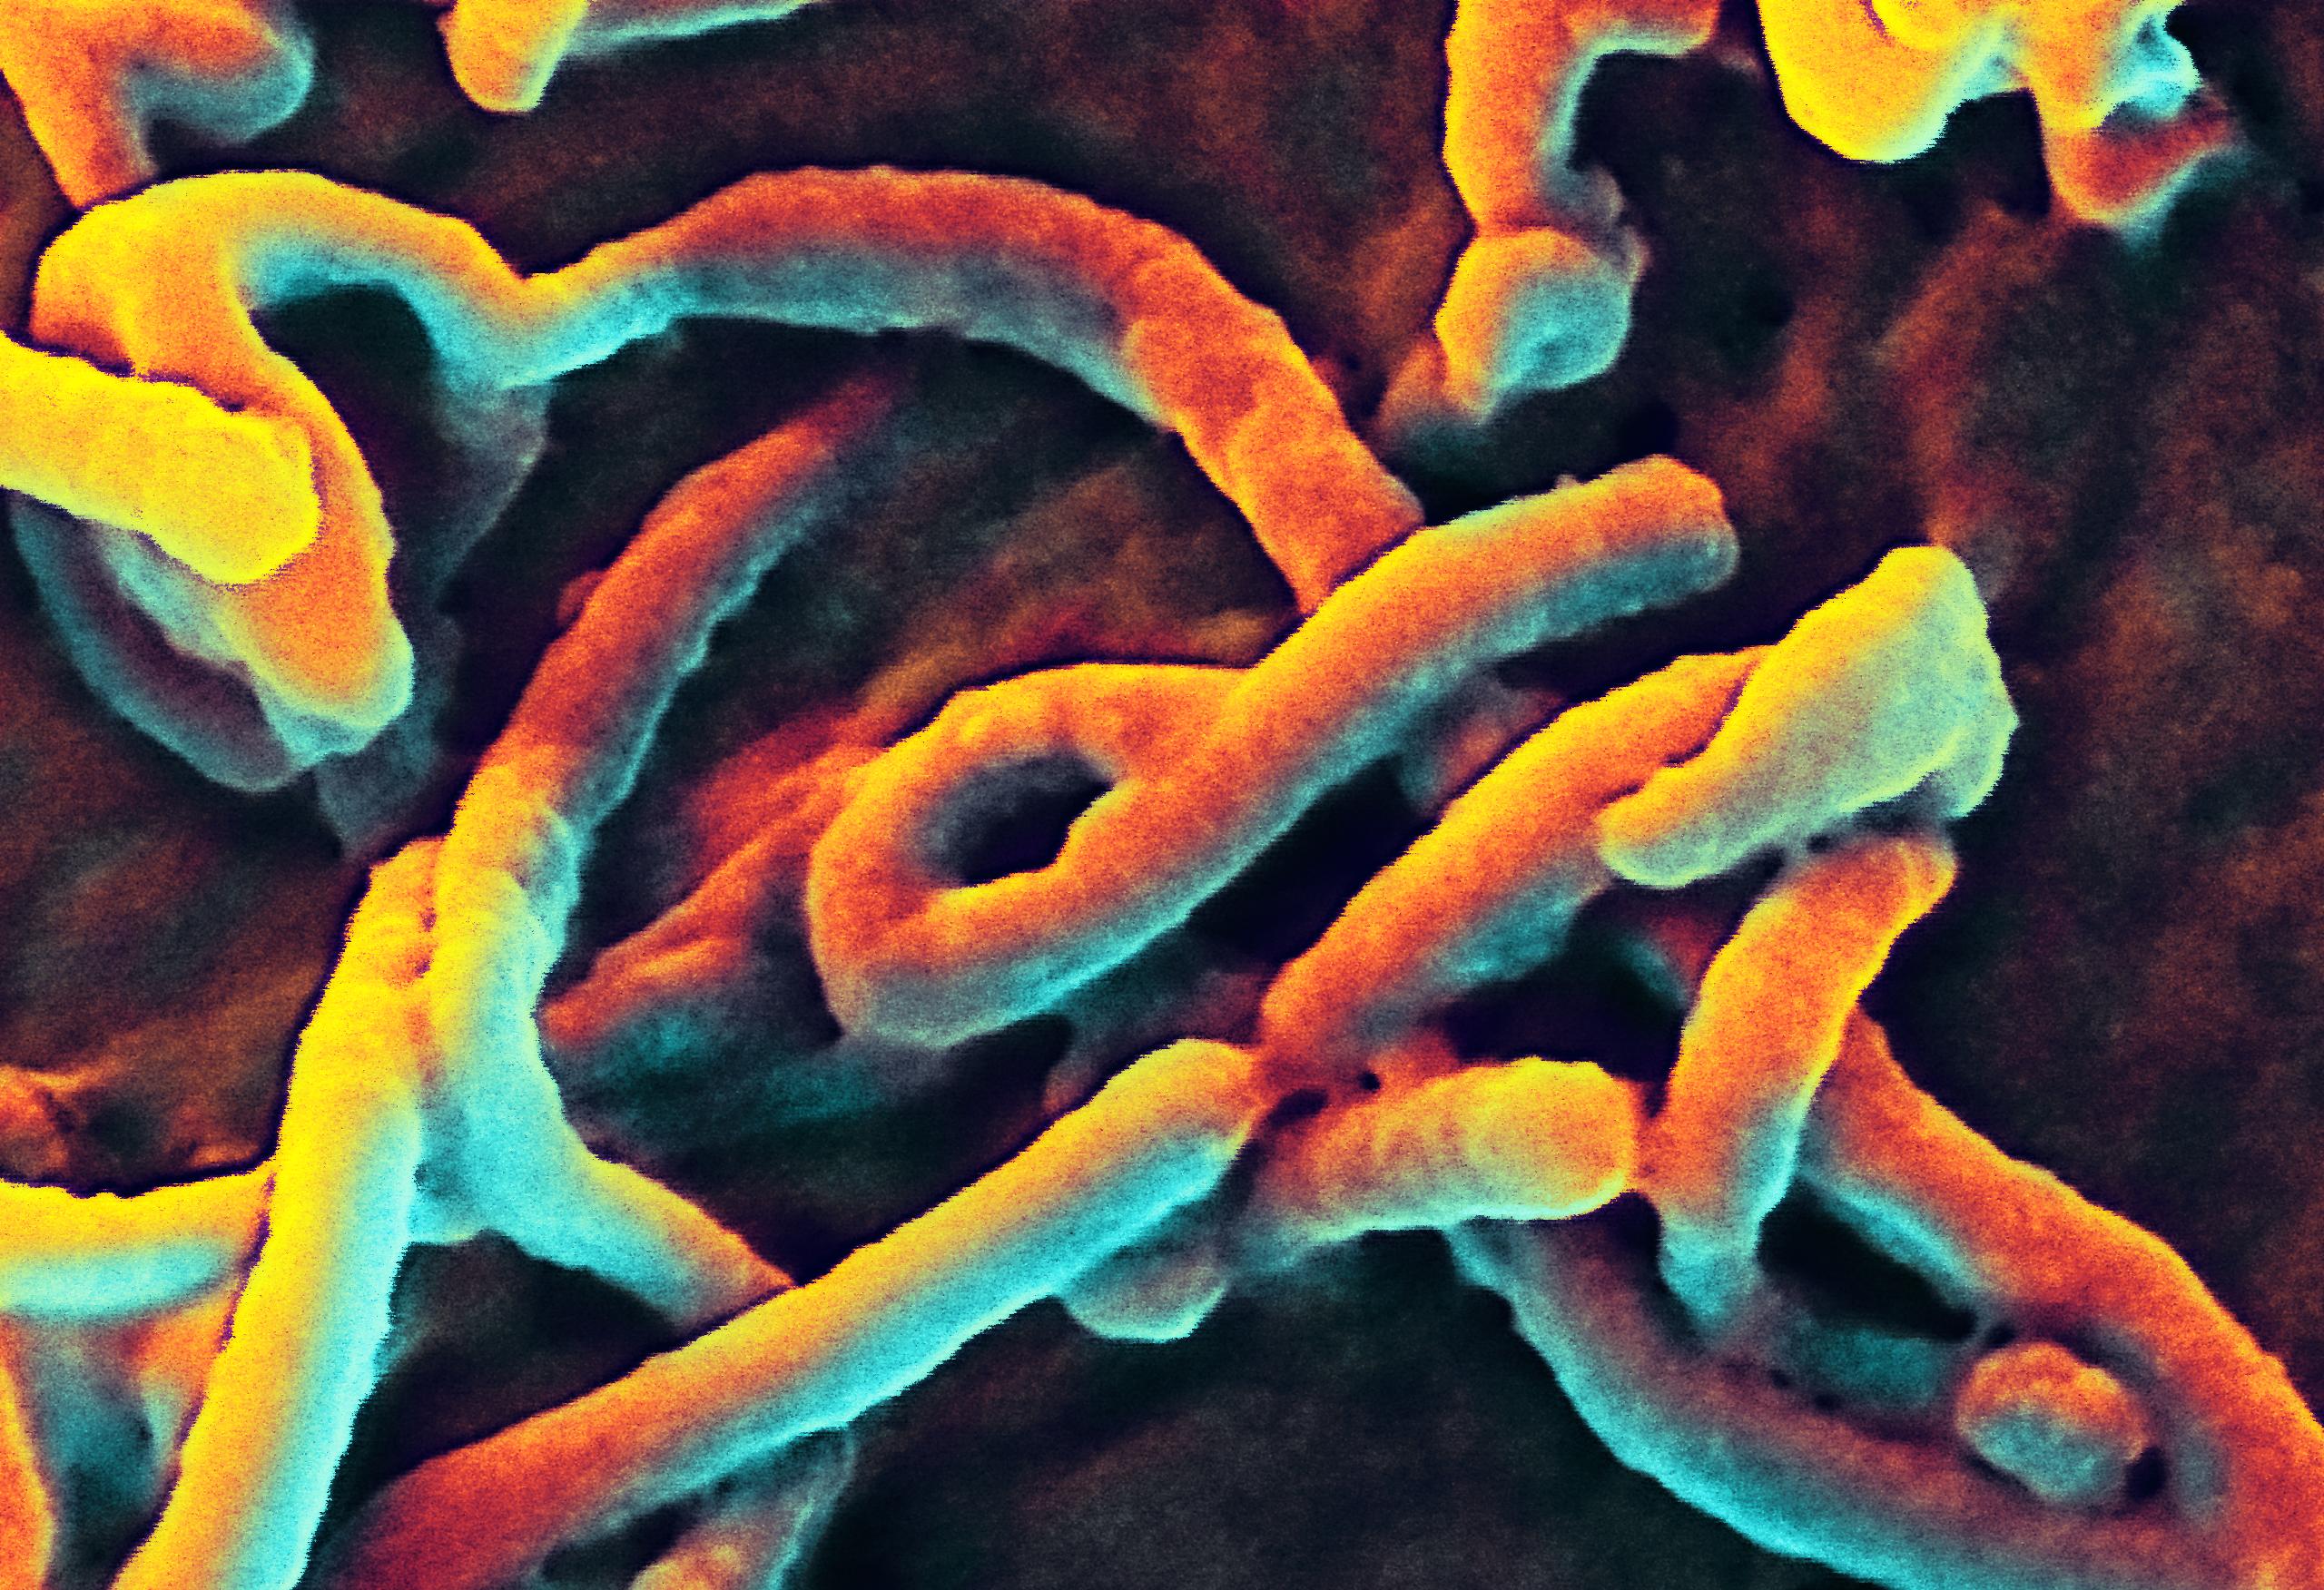 A scanning electron micrograph of Ebola virus buds from the surface of a Vero cell of an African green monkey kidney epithelial cell line. (NIAID/EPA)